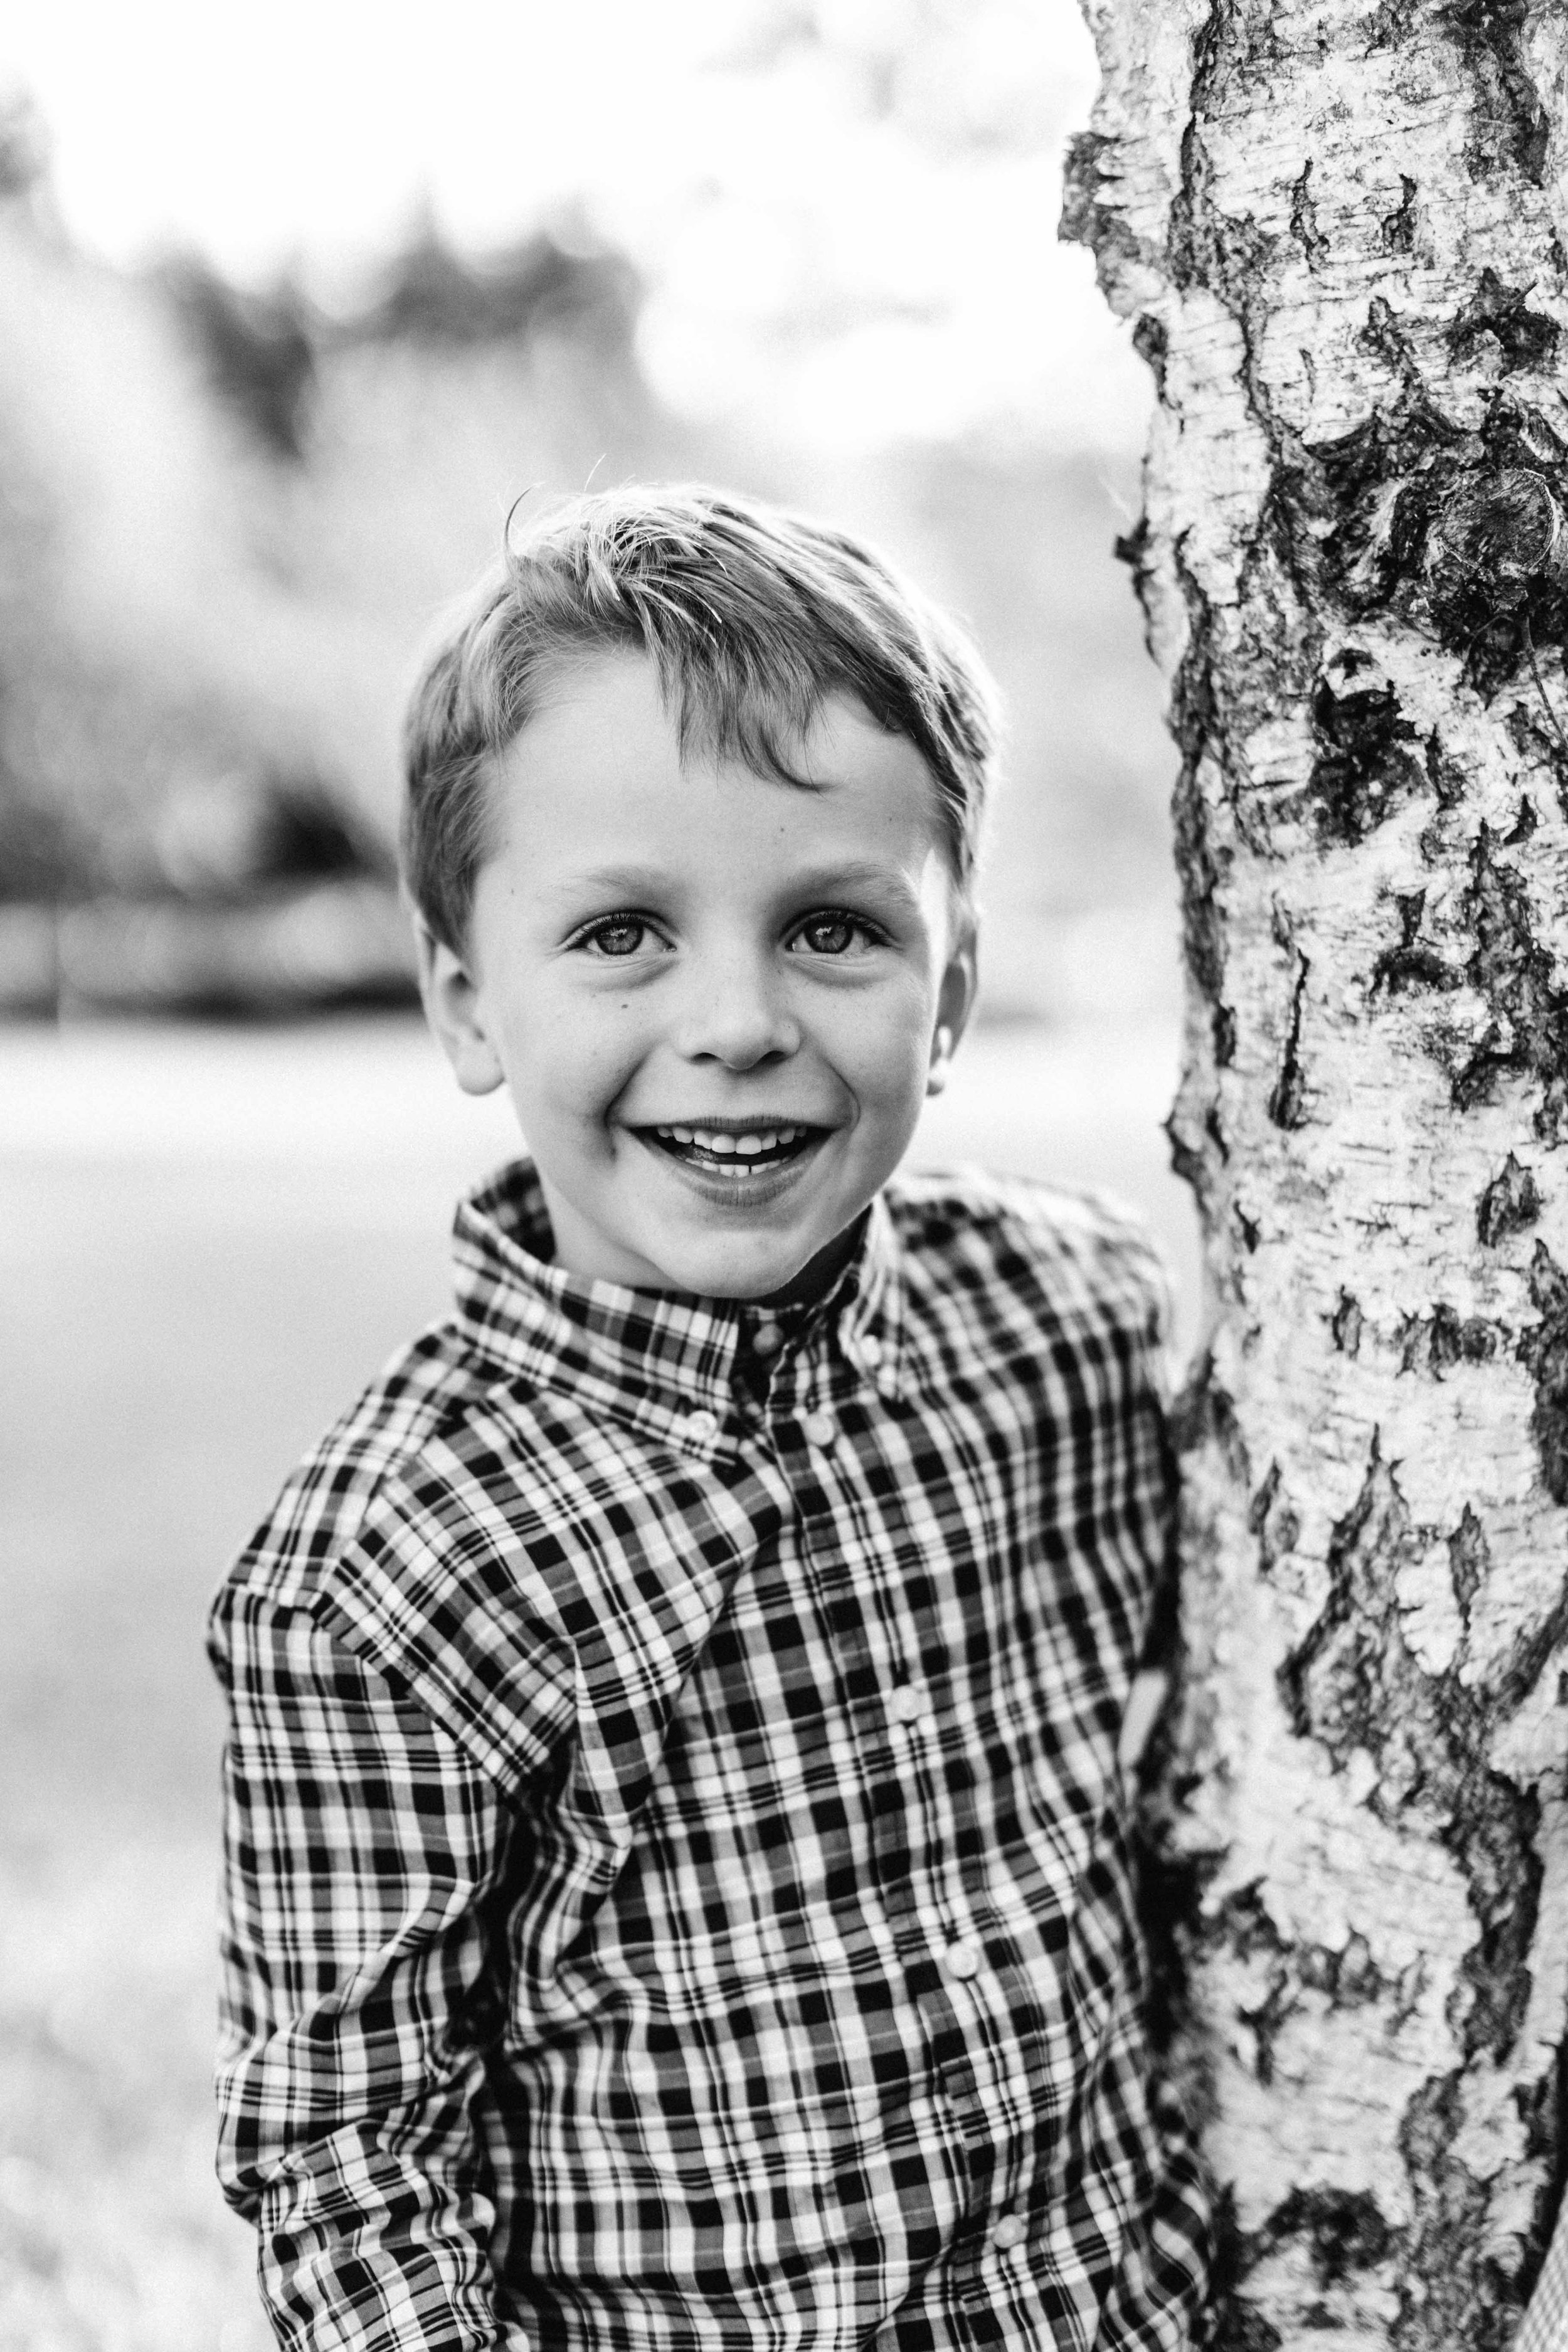 mittagong-bowral-southern-highlands-family-photography-www.emilyobrienphotography.net-lee-family-session-29.jpg